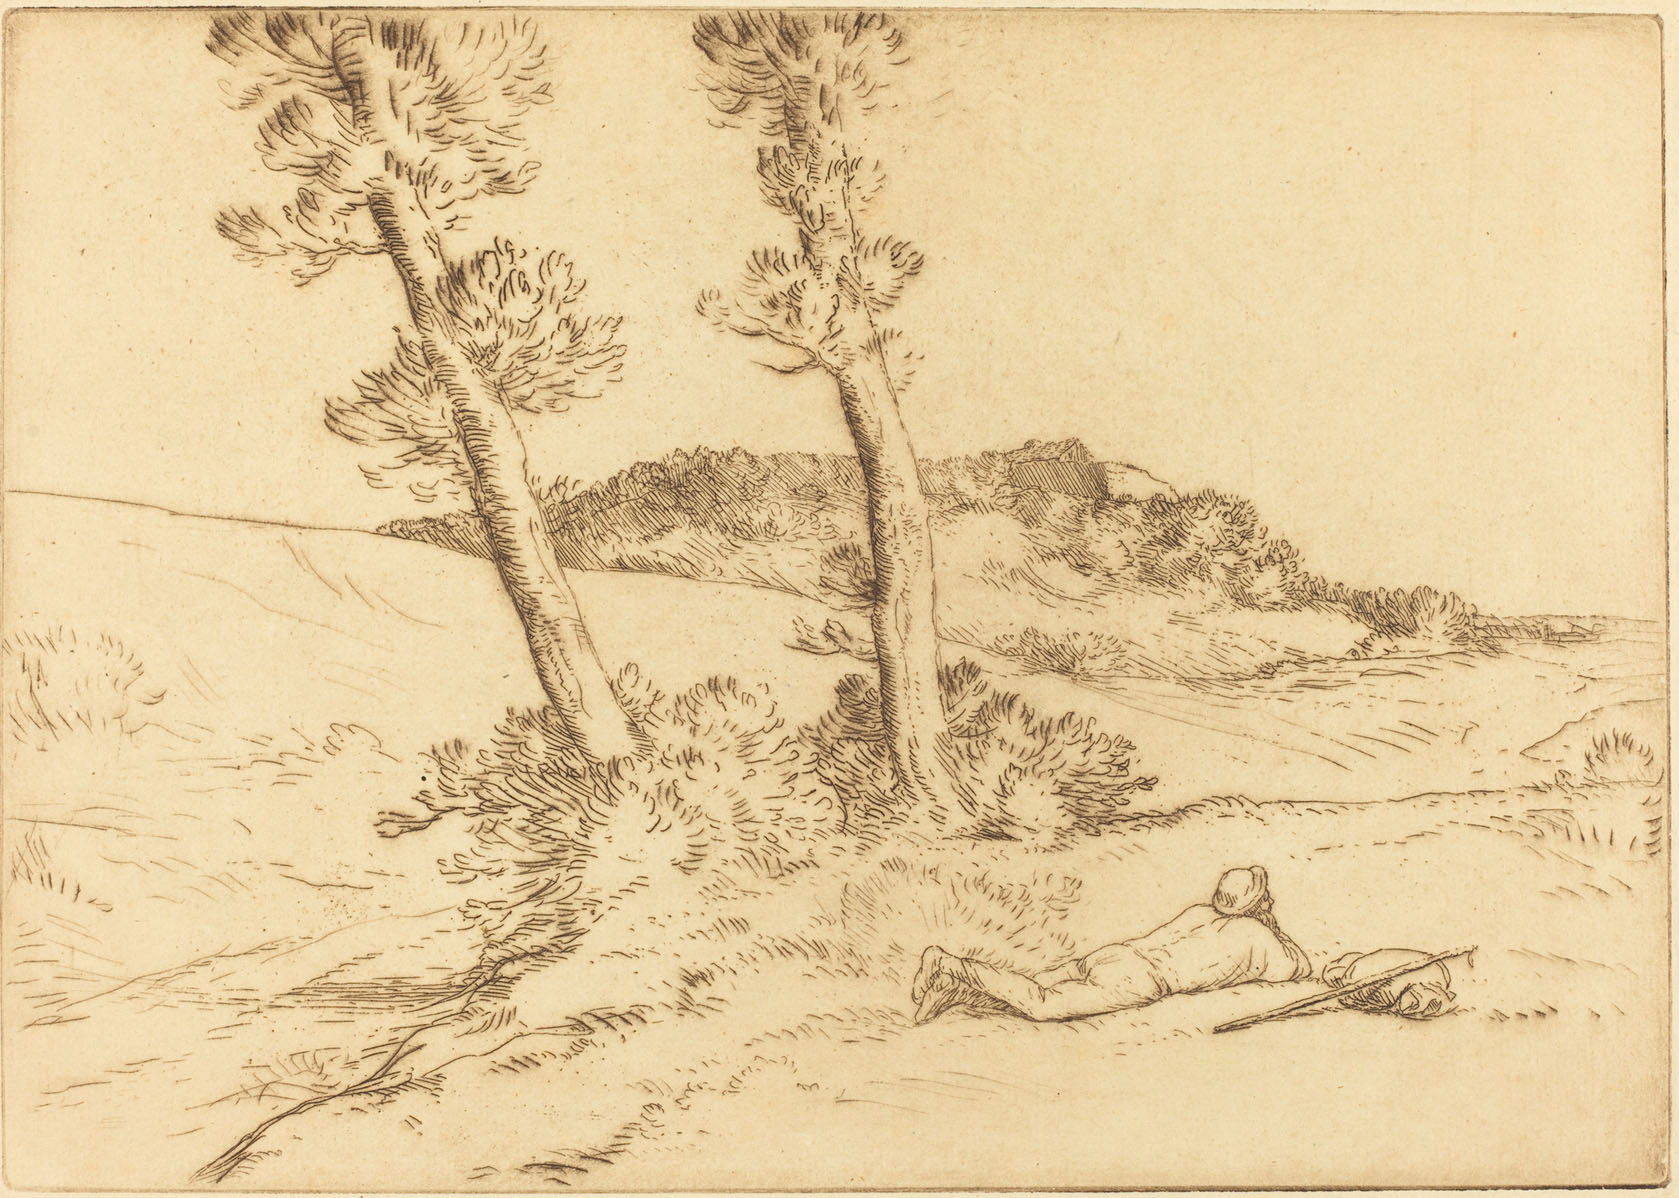 Alphonse Legros, Traveler Reclining on the Grass (Le voyageur etendu sur le gazon), French, 1837 - 1911, , etching and drypoint in brown, Gift of George Matthew Adams in memory of his mother, Lydia Havens Adams